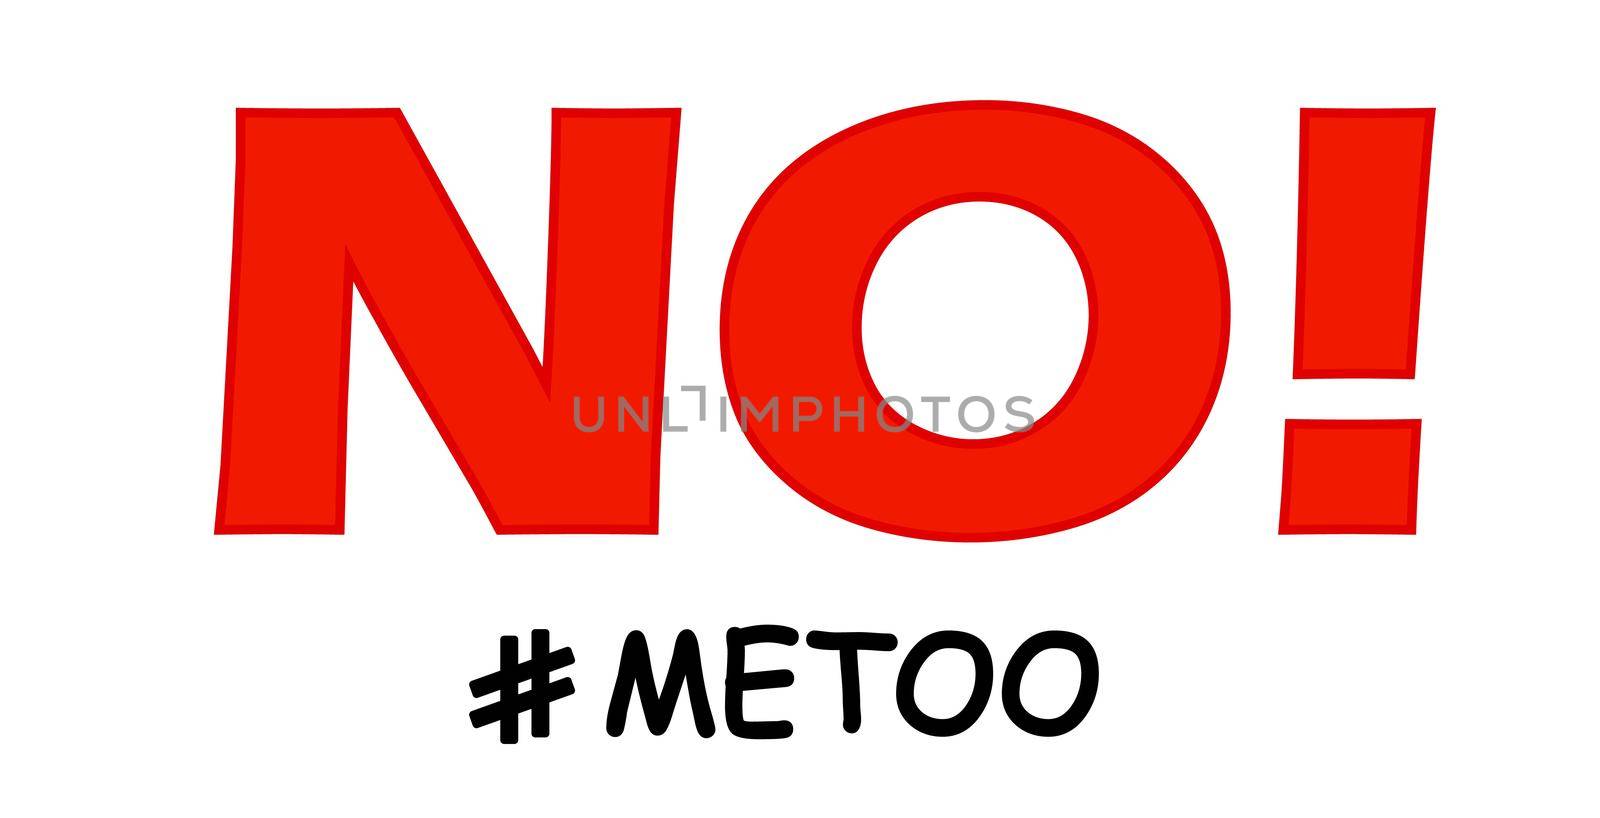 The hashtag is me too. Say no to violence against women. Harassment. Humiliation. Banner. Social movement. Feminism.